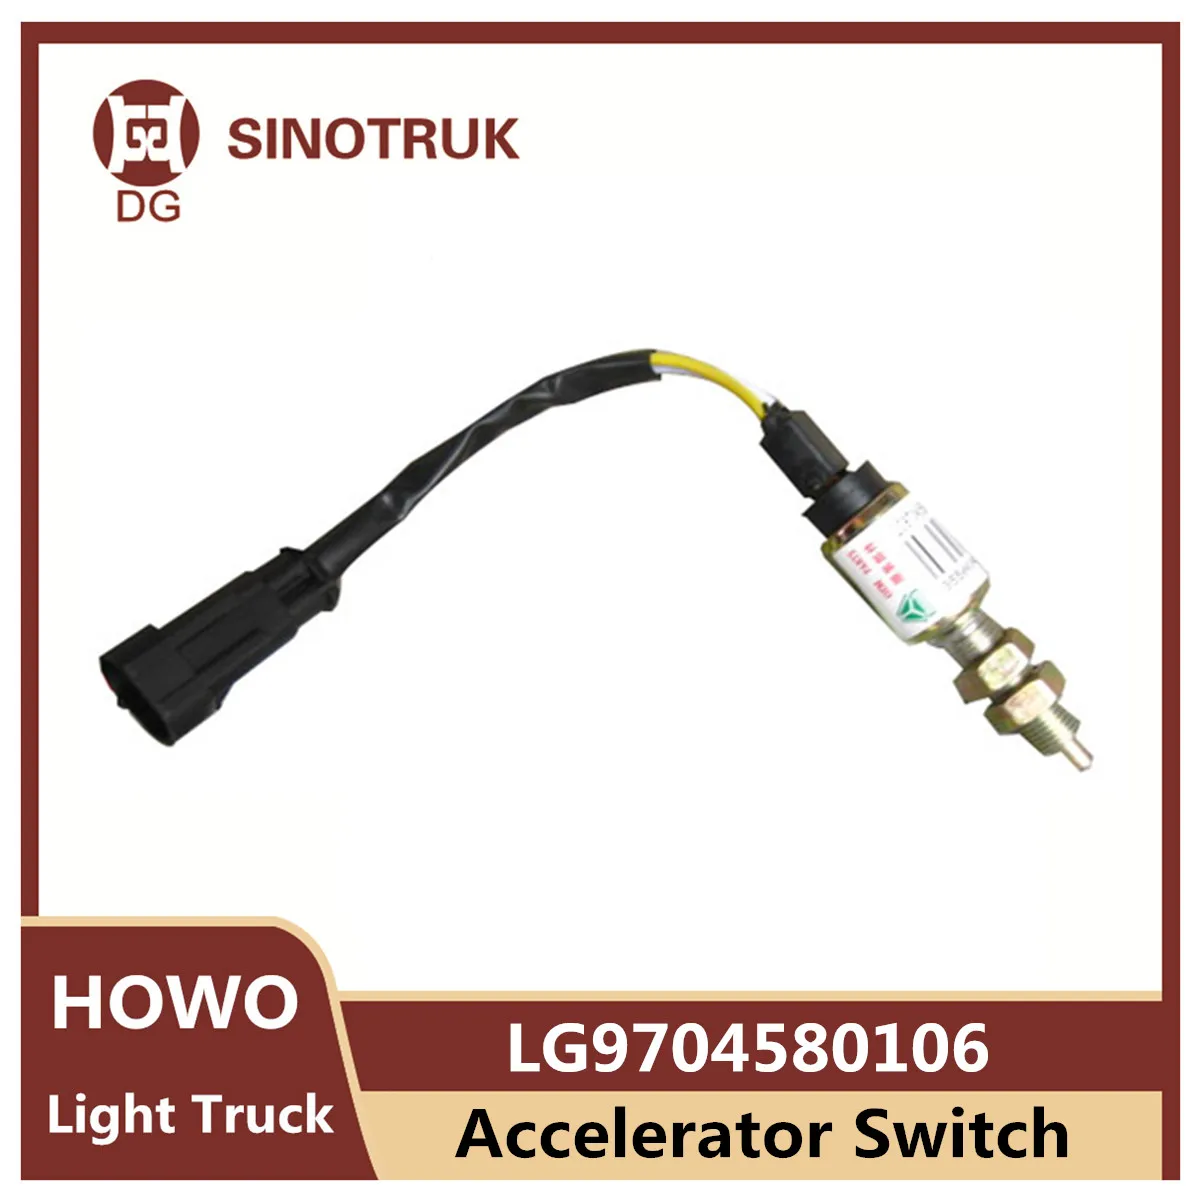 Accelerator Switch LG9704580106 for Sinotruk Howo Light Truck Clutch Switch Original Auto Truck Parts 81260 1d000 for kia 0 7 10 rondo luggage lid lock button switch tailgate switch 812601d000 auto parts